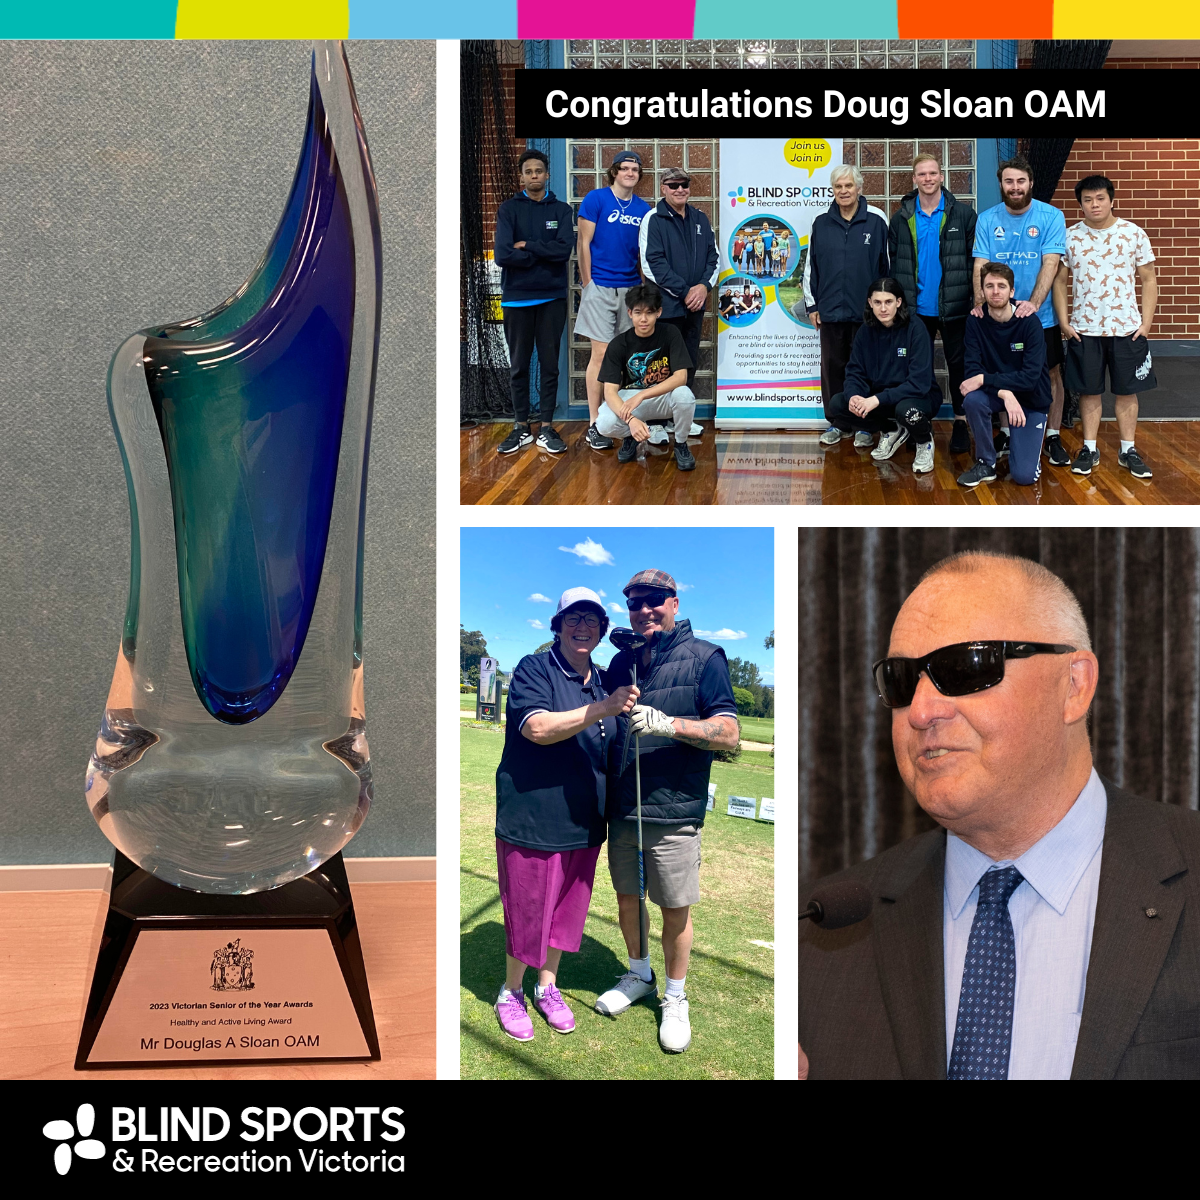 An image collage shows the ‘Active and Healthy Living Award’ trophy, a group photo with Doug Sloan and students at the Box Hill Institute during an education awareness session, Doug and his caddy on the golf course and a close up of Doug taken at an event where he was the MC..